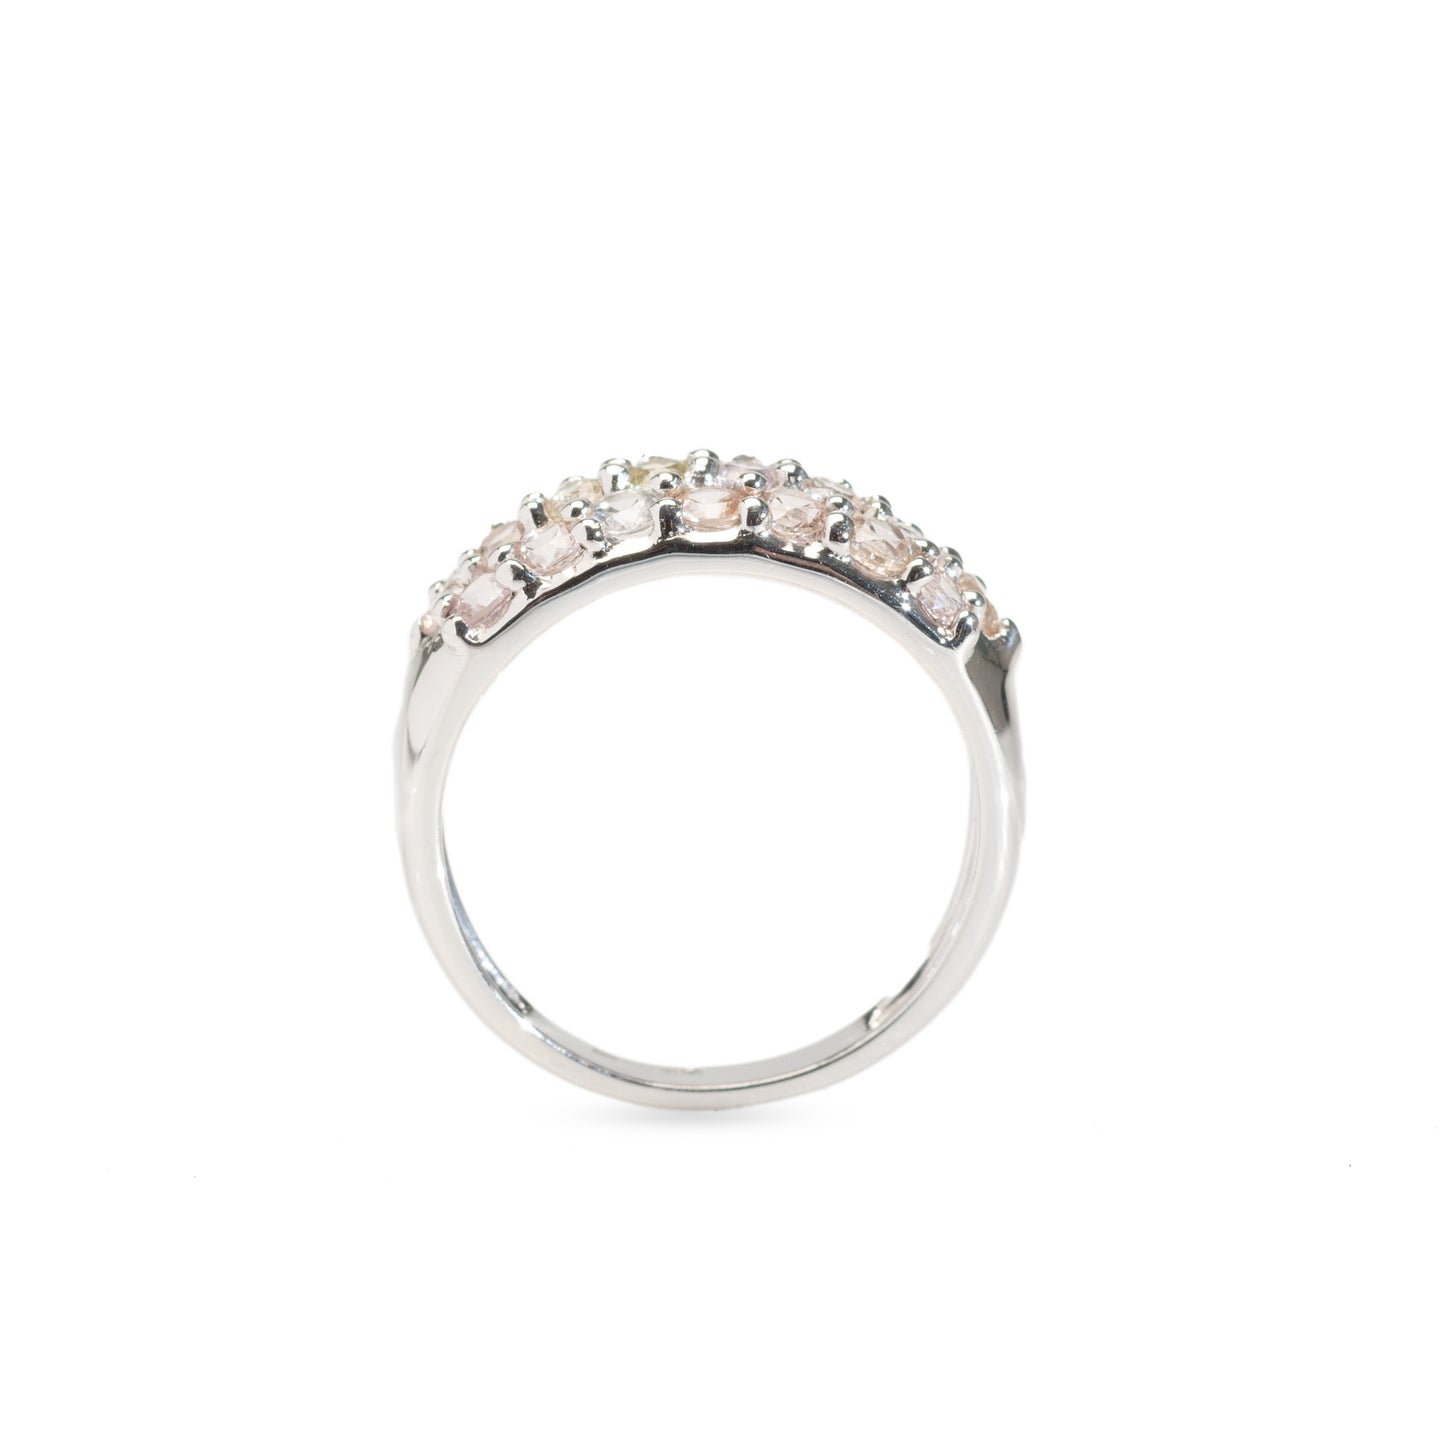 9ct Gold & Pastel Sapphire Pave Set Ring In Broad White Gold Band Size N  (Code A427)